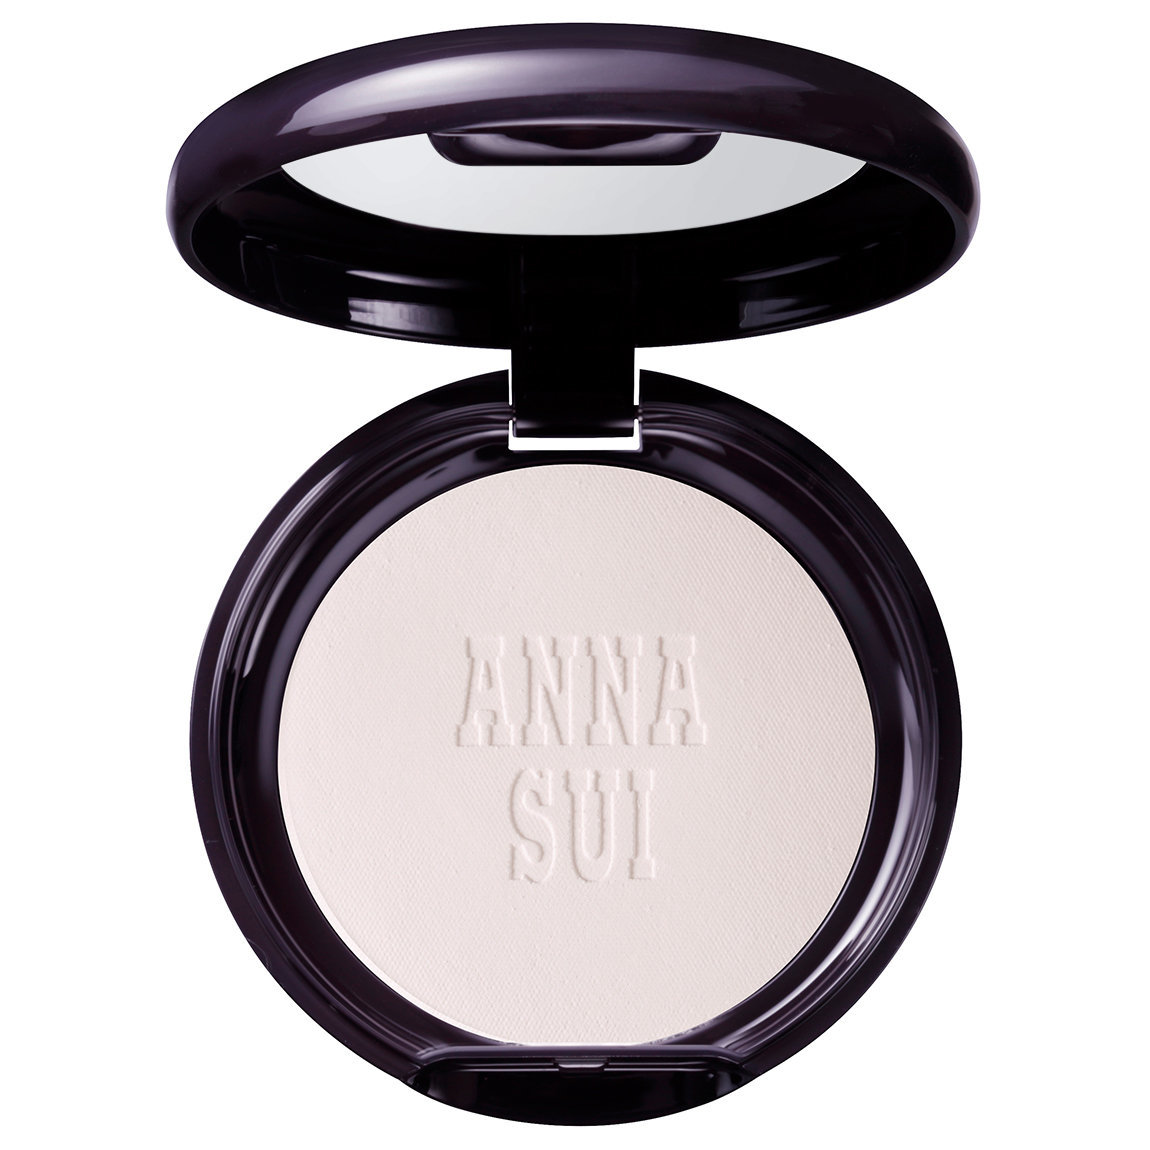 Anna Sui Brightening Face Powder alternative view 1 - product swatch.